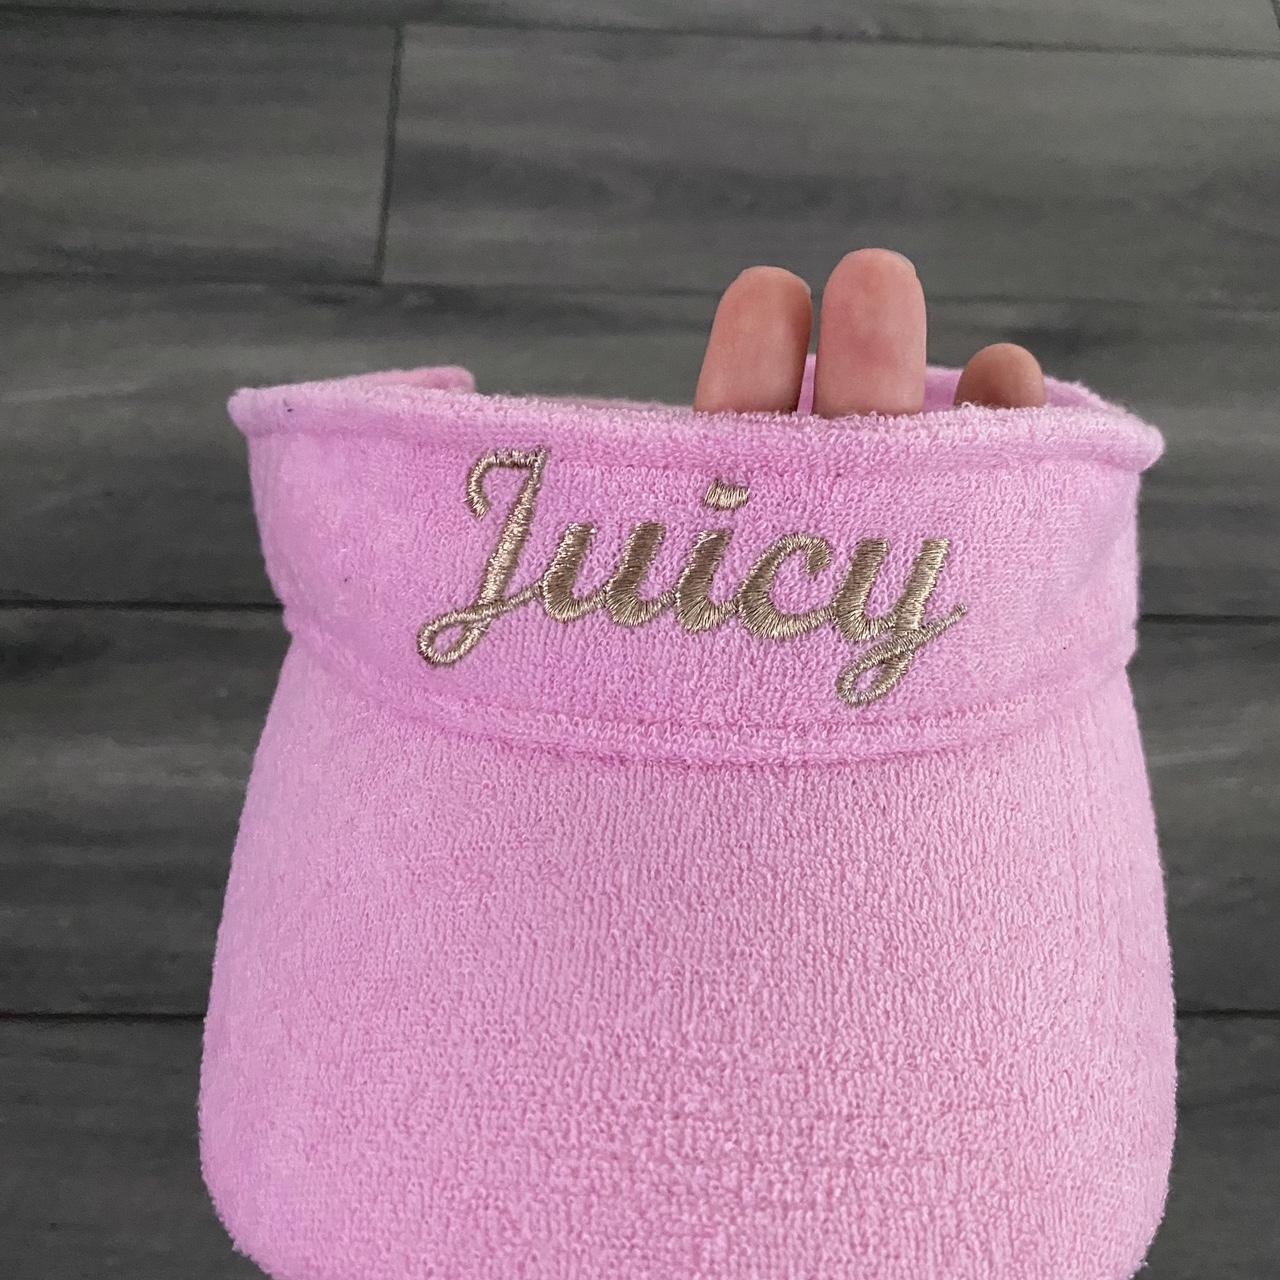 Juicy Couture Women's Pink and Gold Hat | Depop